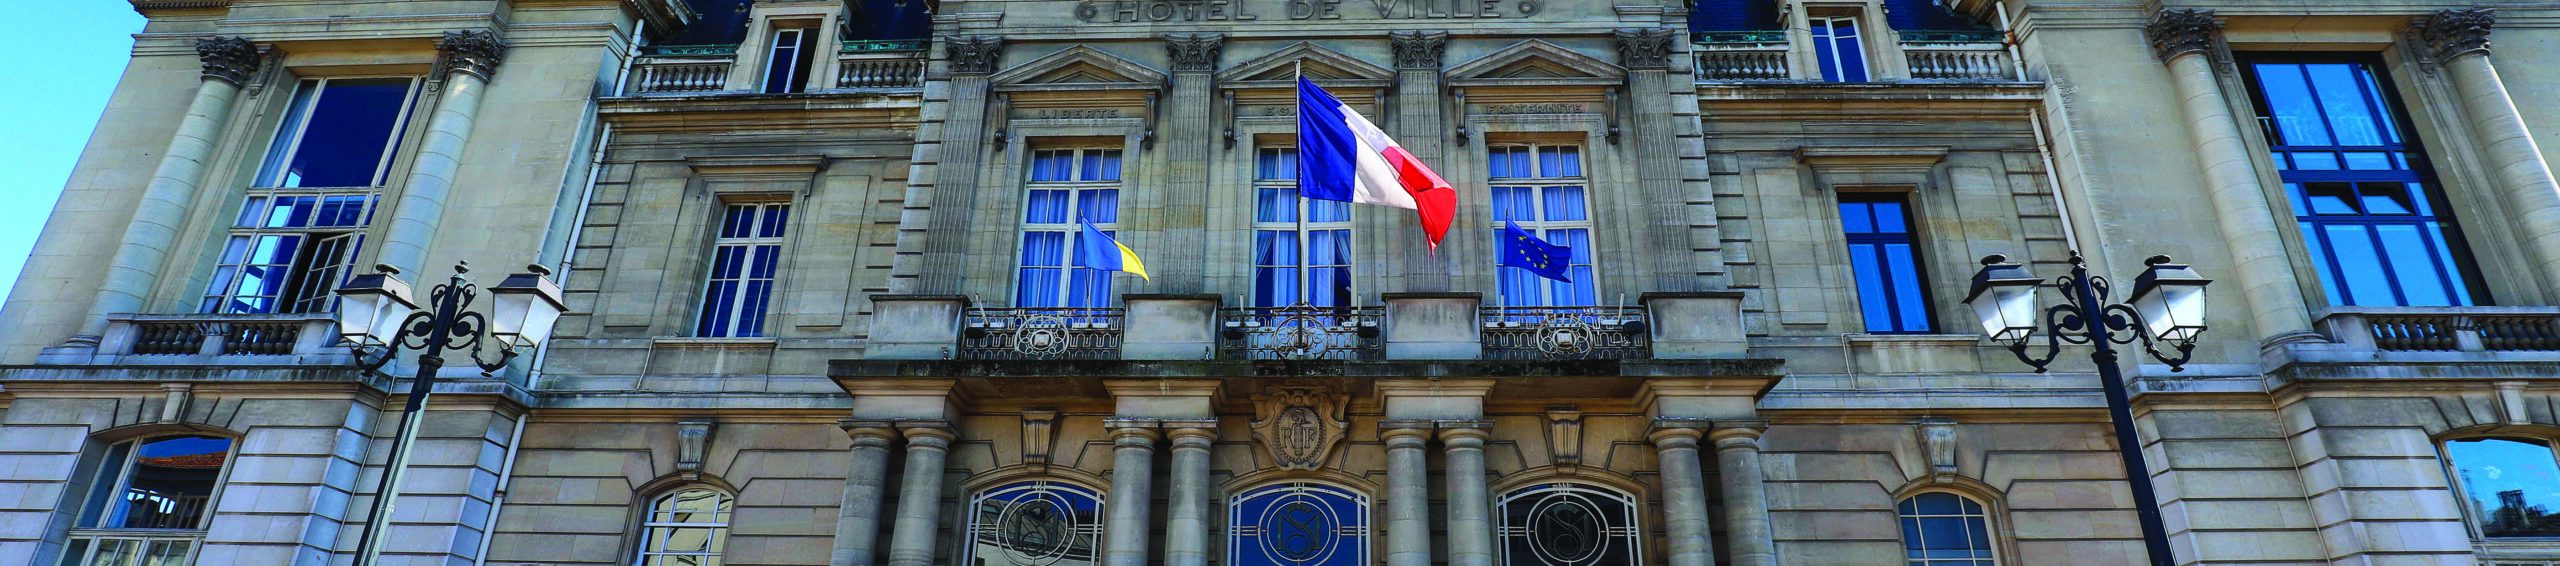 The town hall of Saint-Maur-des-Fosses city . it is a commune in the southeastern suburbs of Paris, France. It is located 11.7 kilometres from the center of Paris. France.